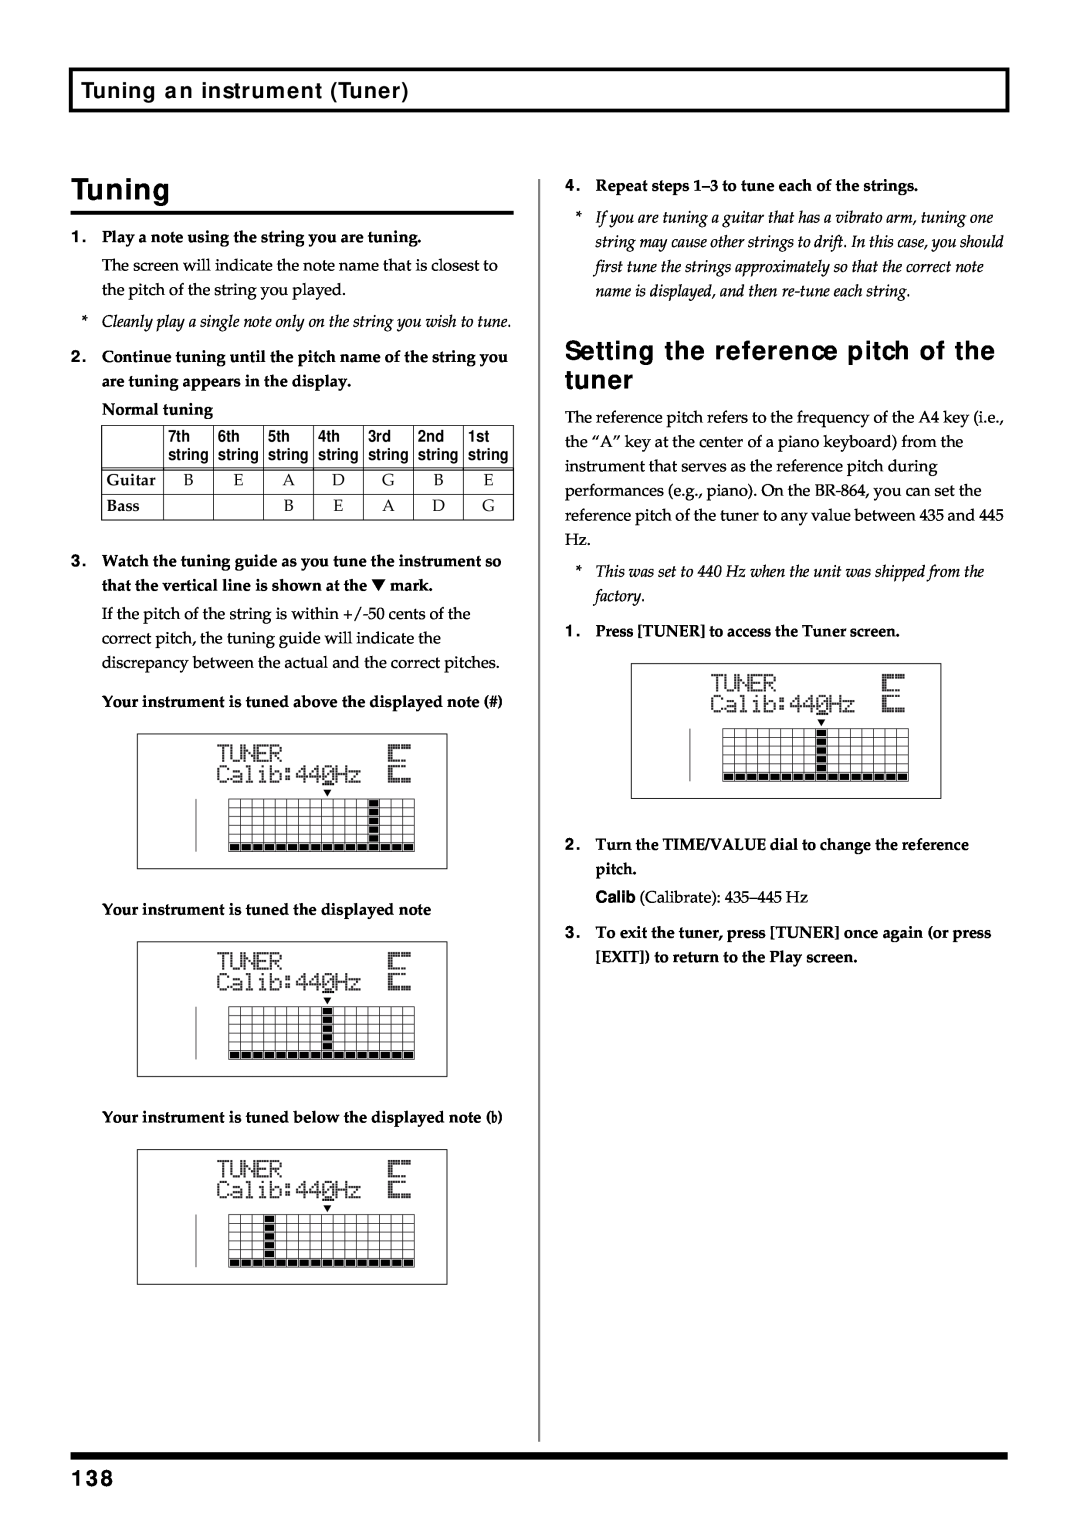 Roland BR-864 owner manual Tuning, Setting the reference pitch of the tuner 